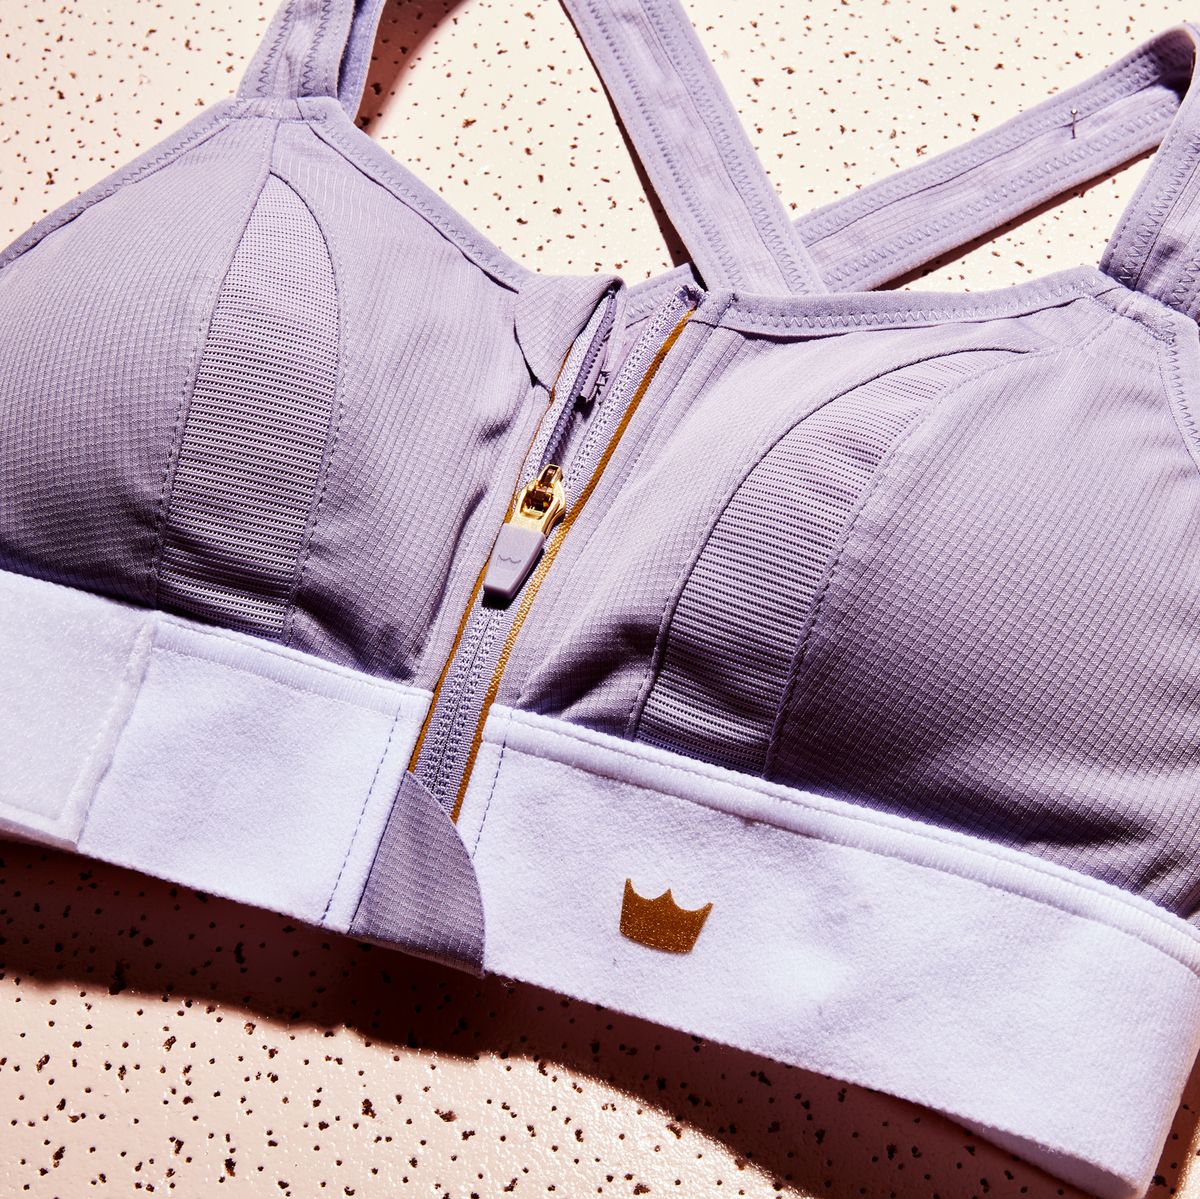 She Fit Sports Bra Review